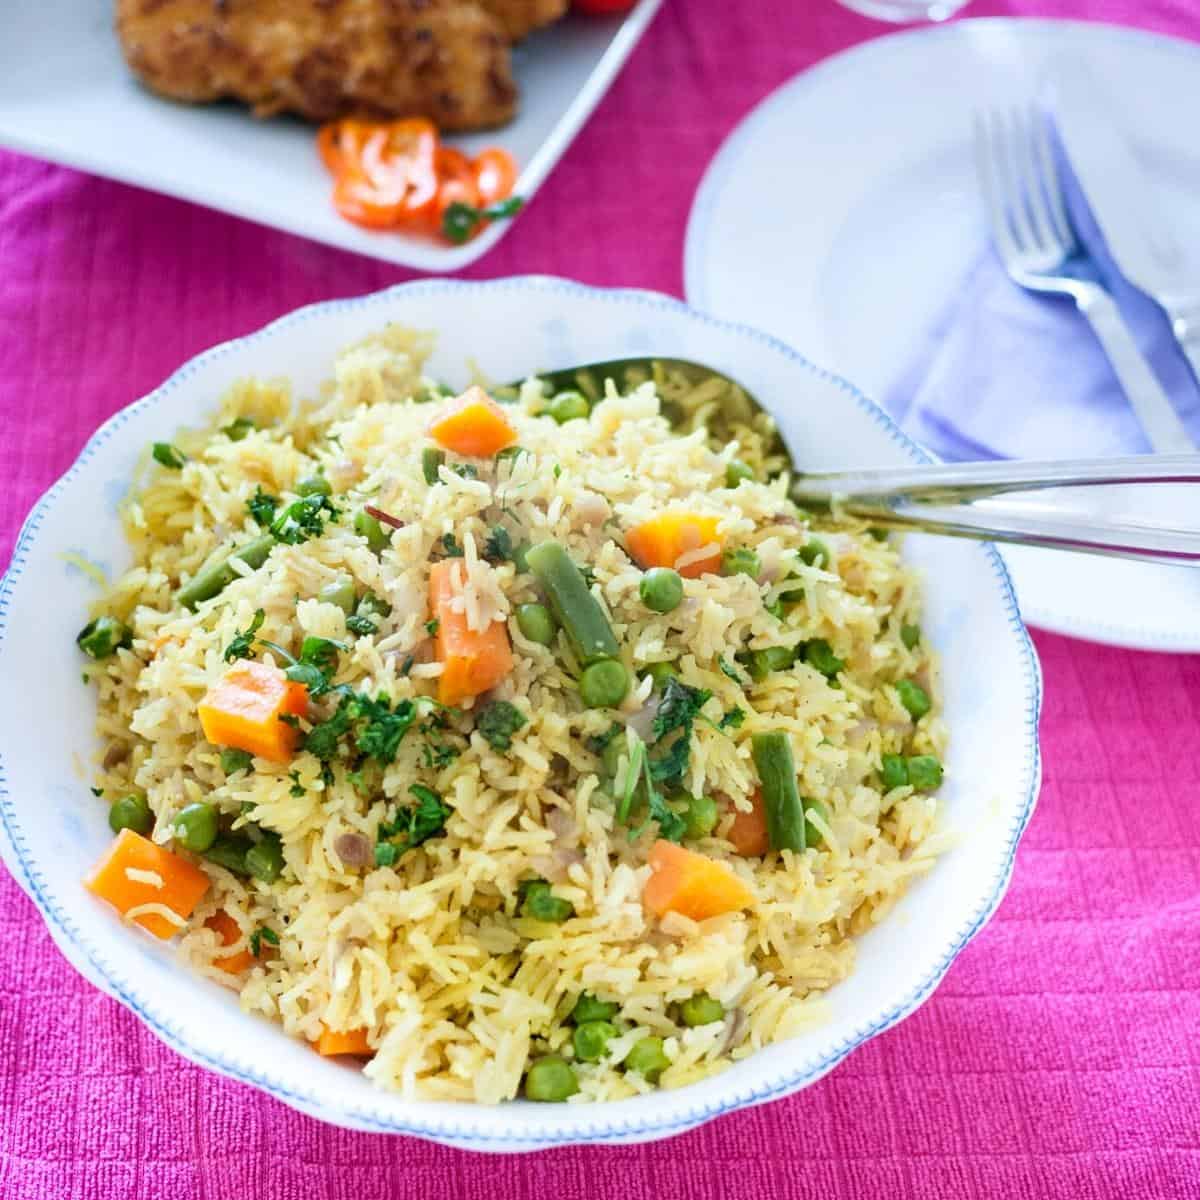 A bowl with rice and veggies